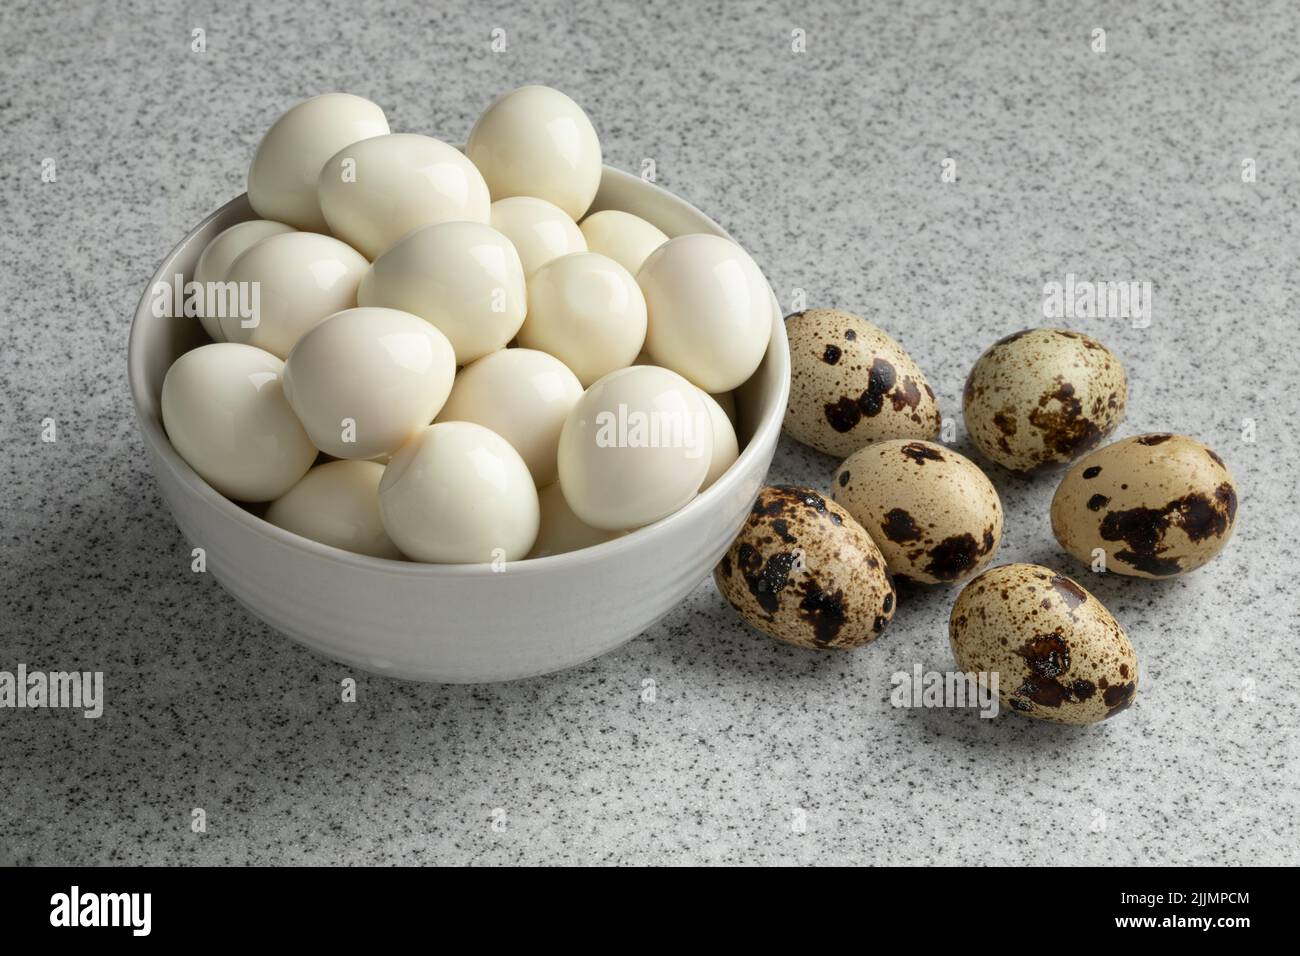 Cooked and fresh raw Quail eggs close up Stock Photo